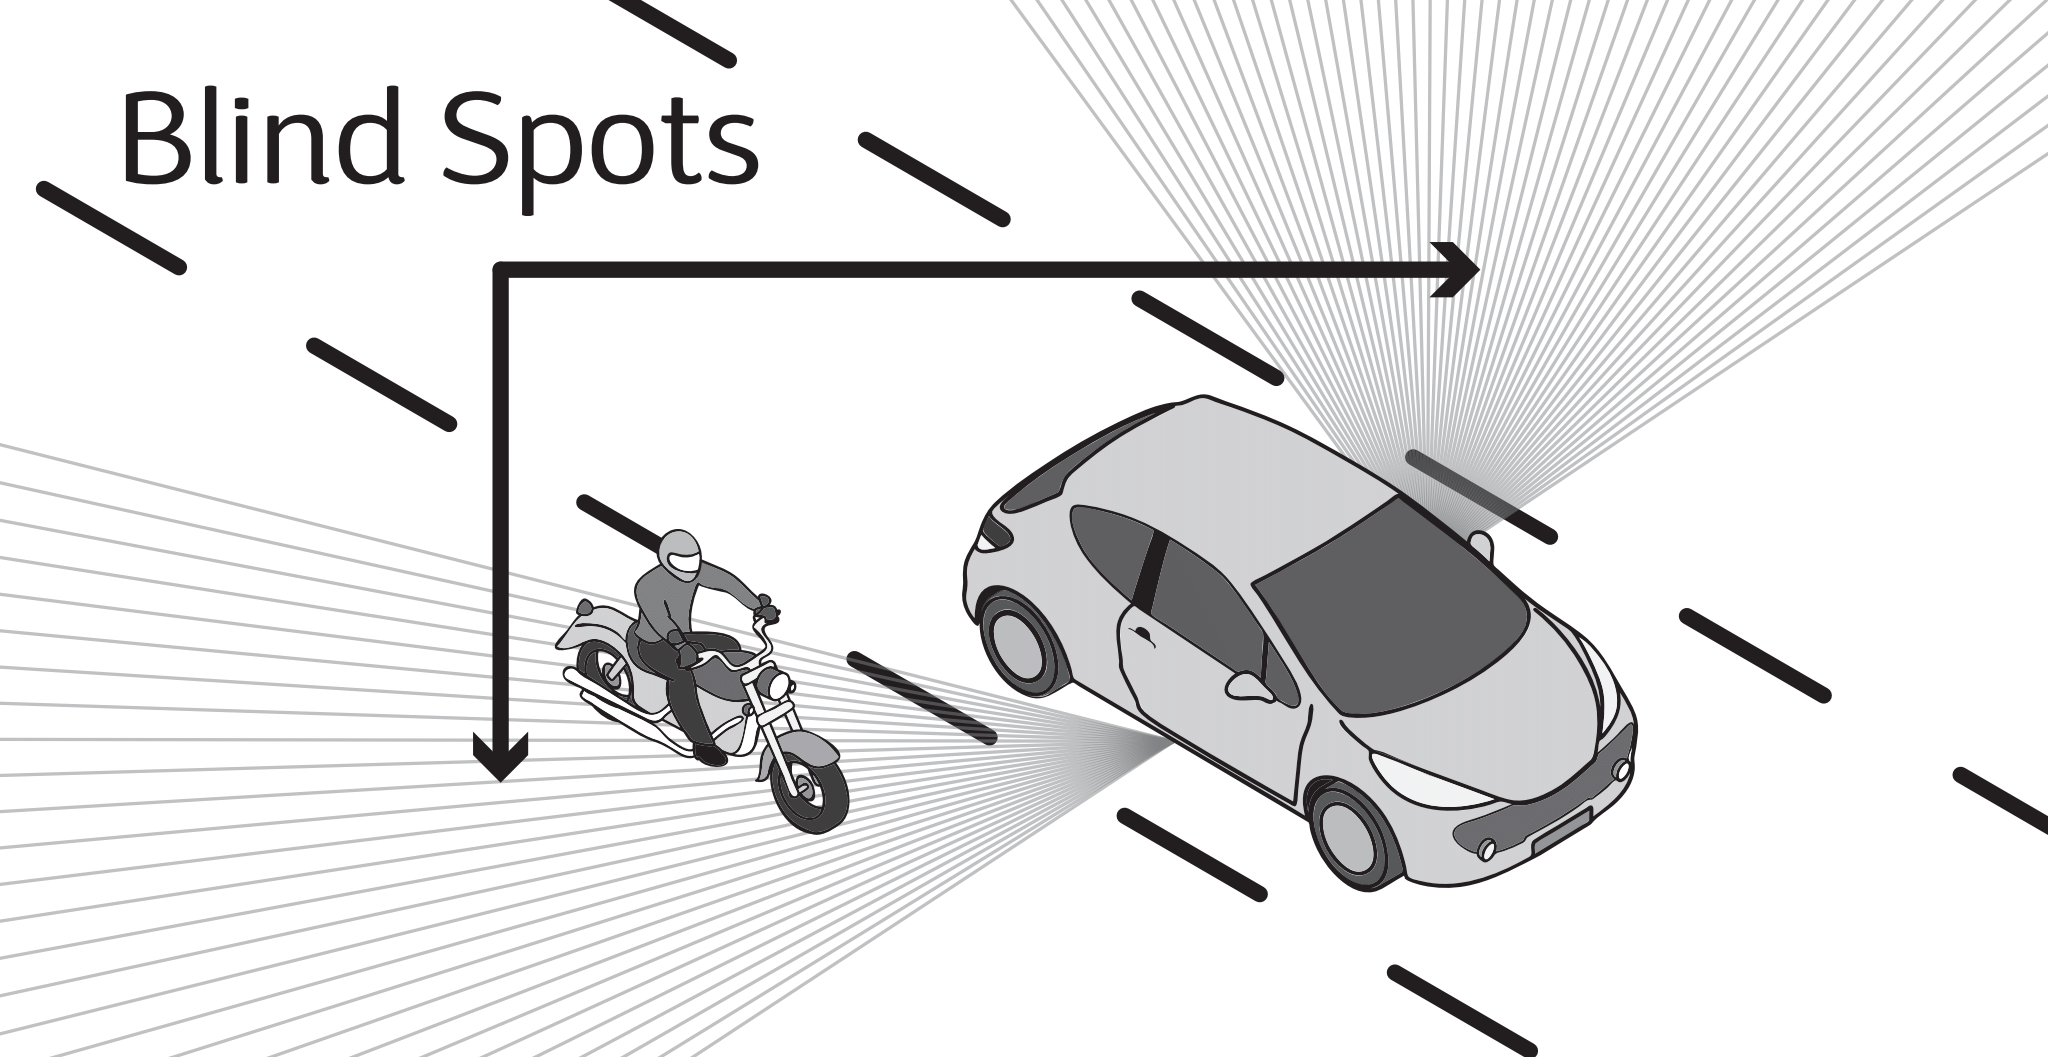 image of blind spots for a vehicle when you are on a motorcycle along side